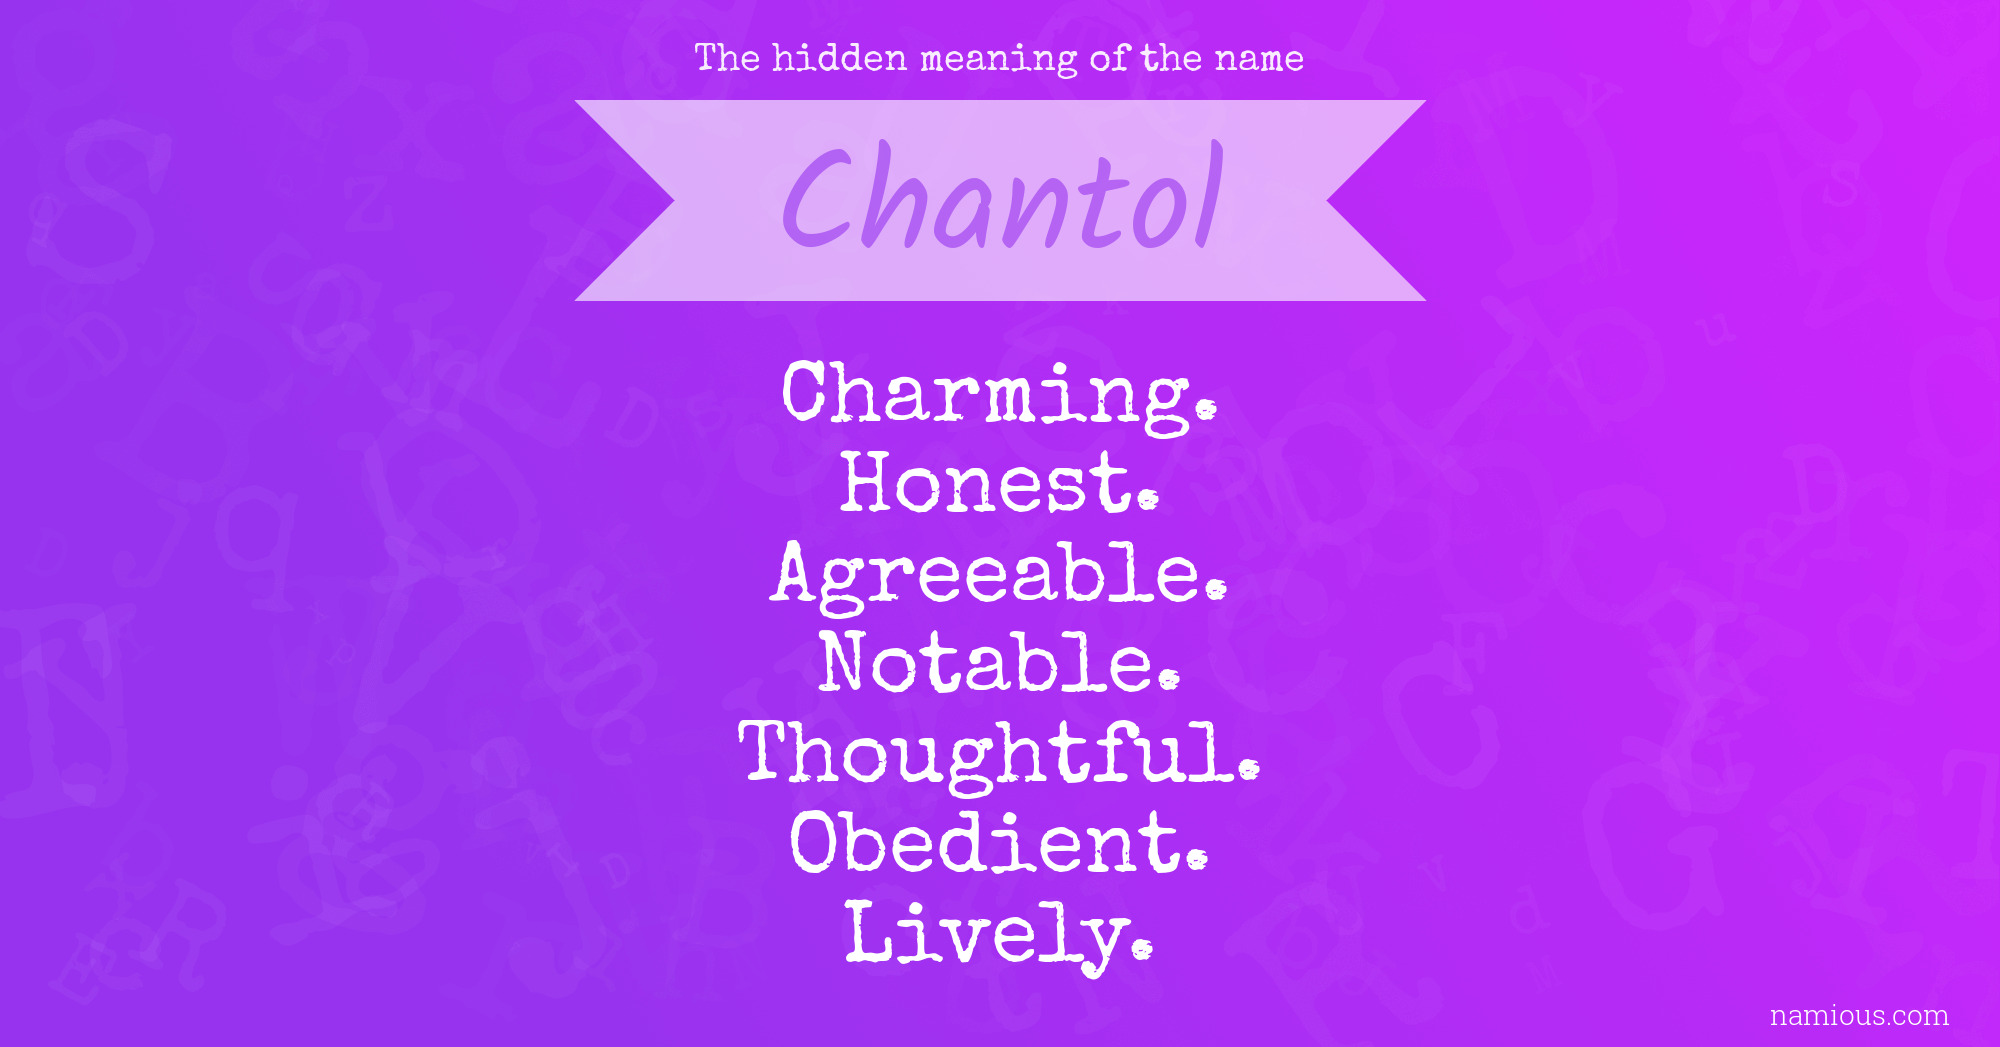 The hidden meaning of the name Chantol